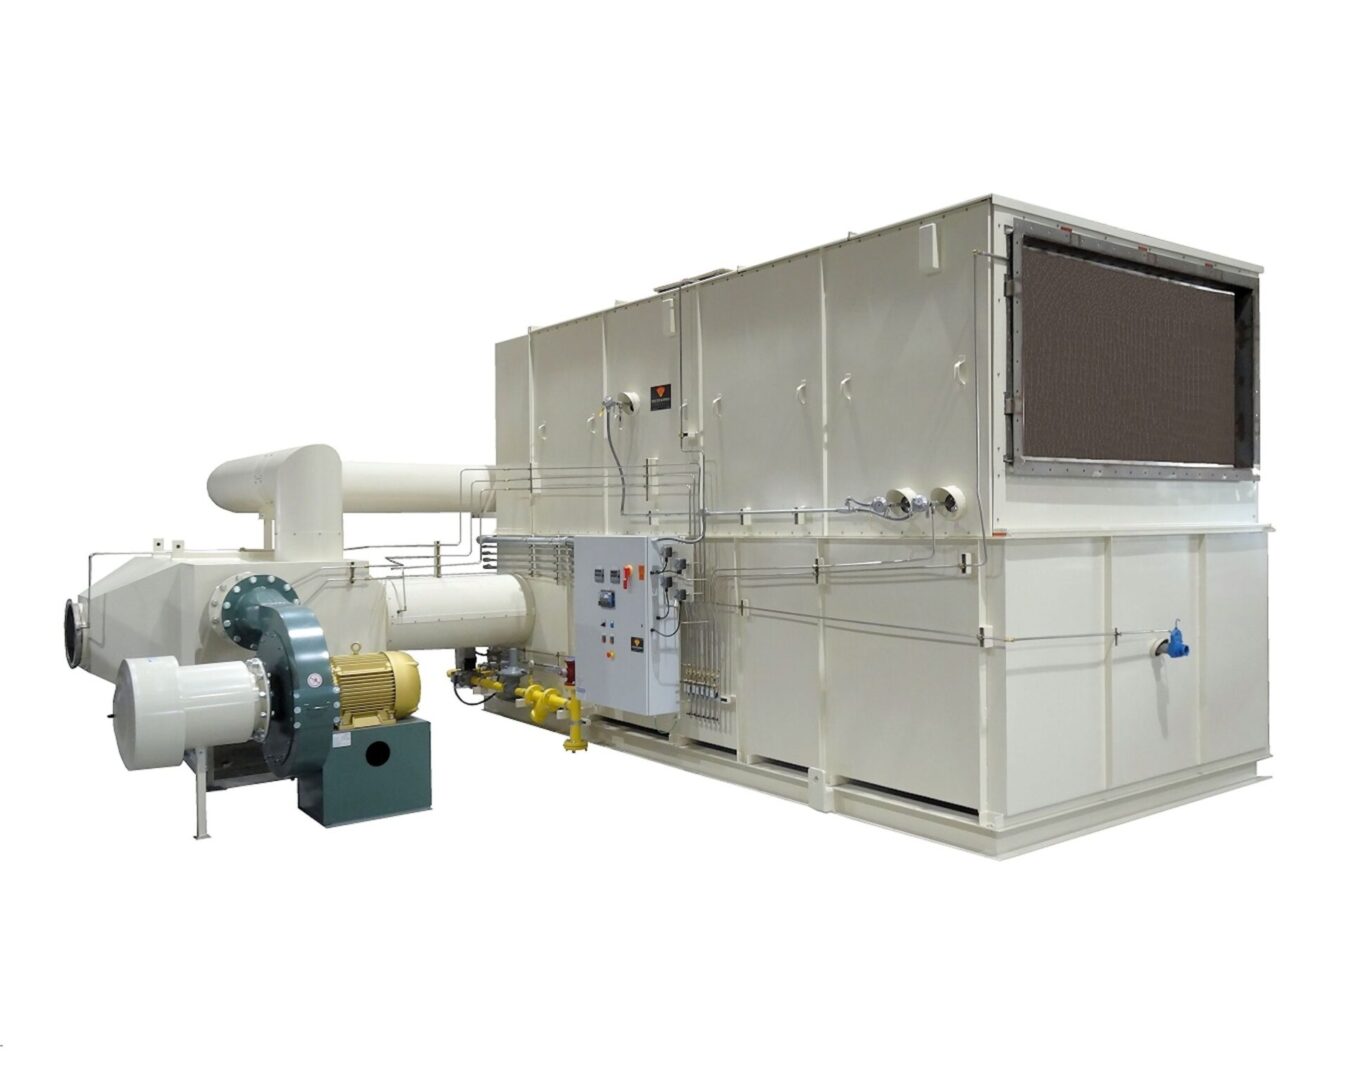 Recirculating Indirect Air Heater packaged with hot side blowers, air heat burners, heat exchanger and controls.